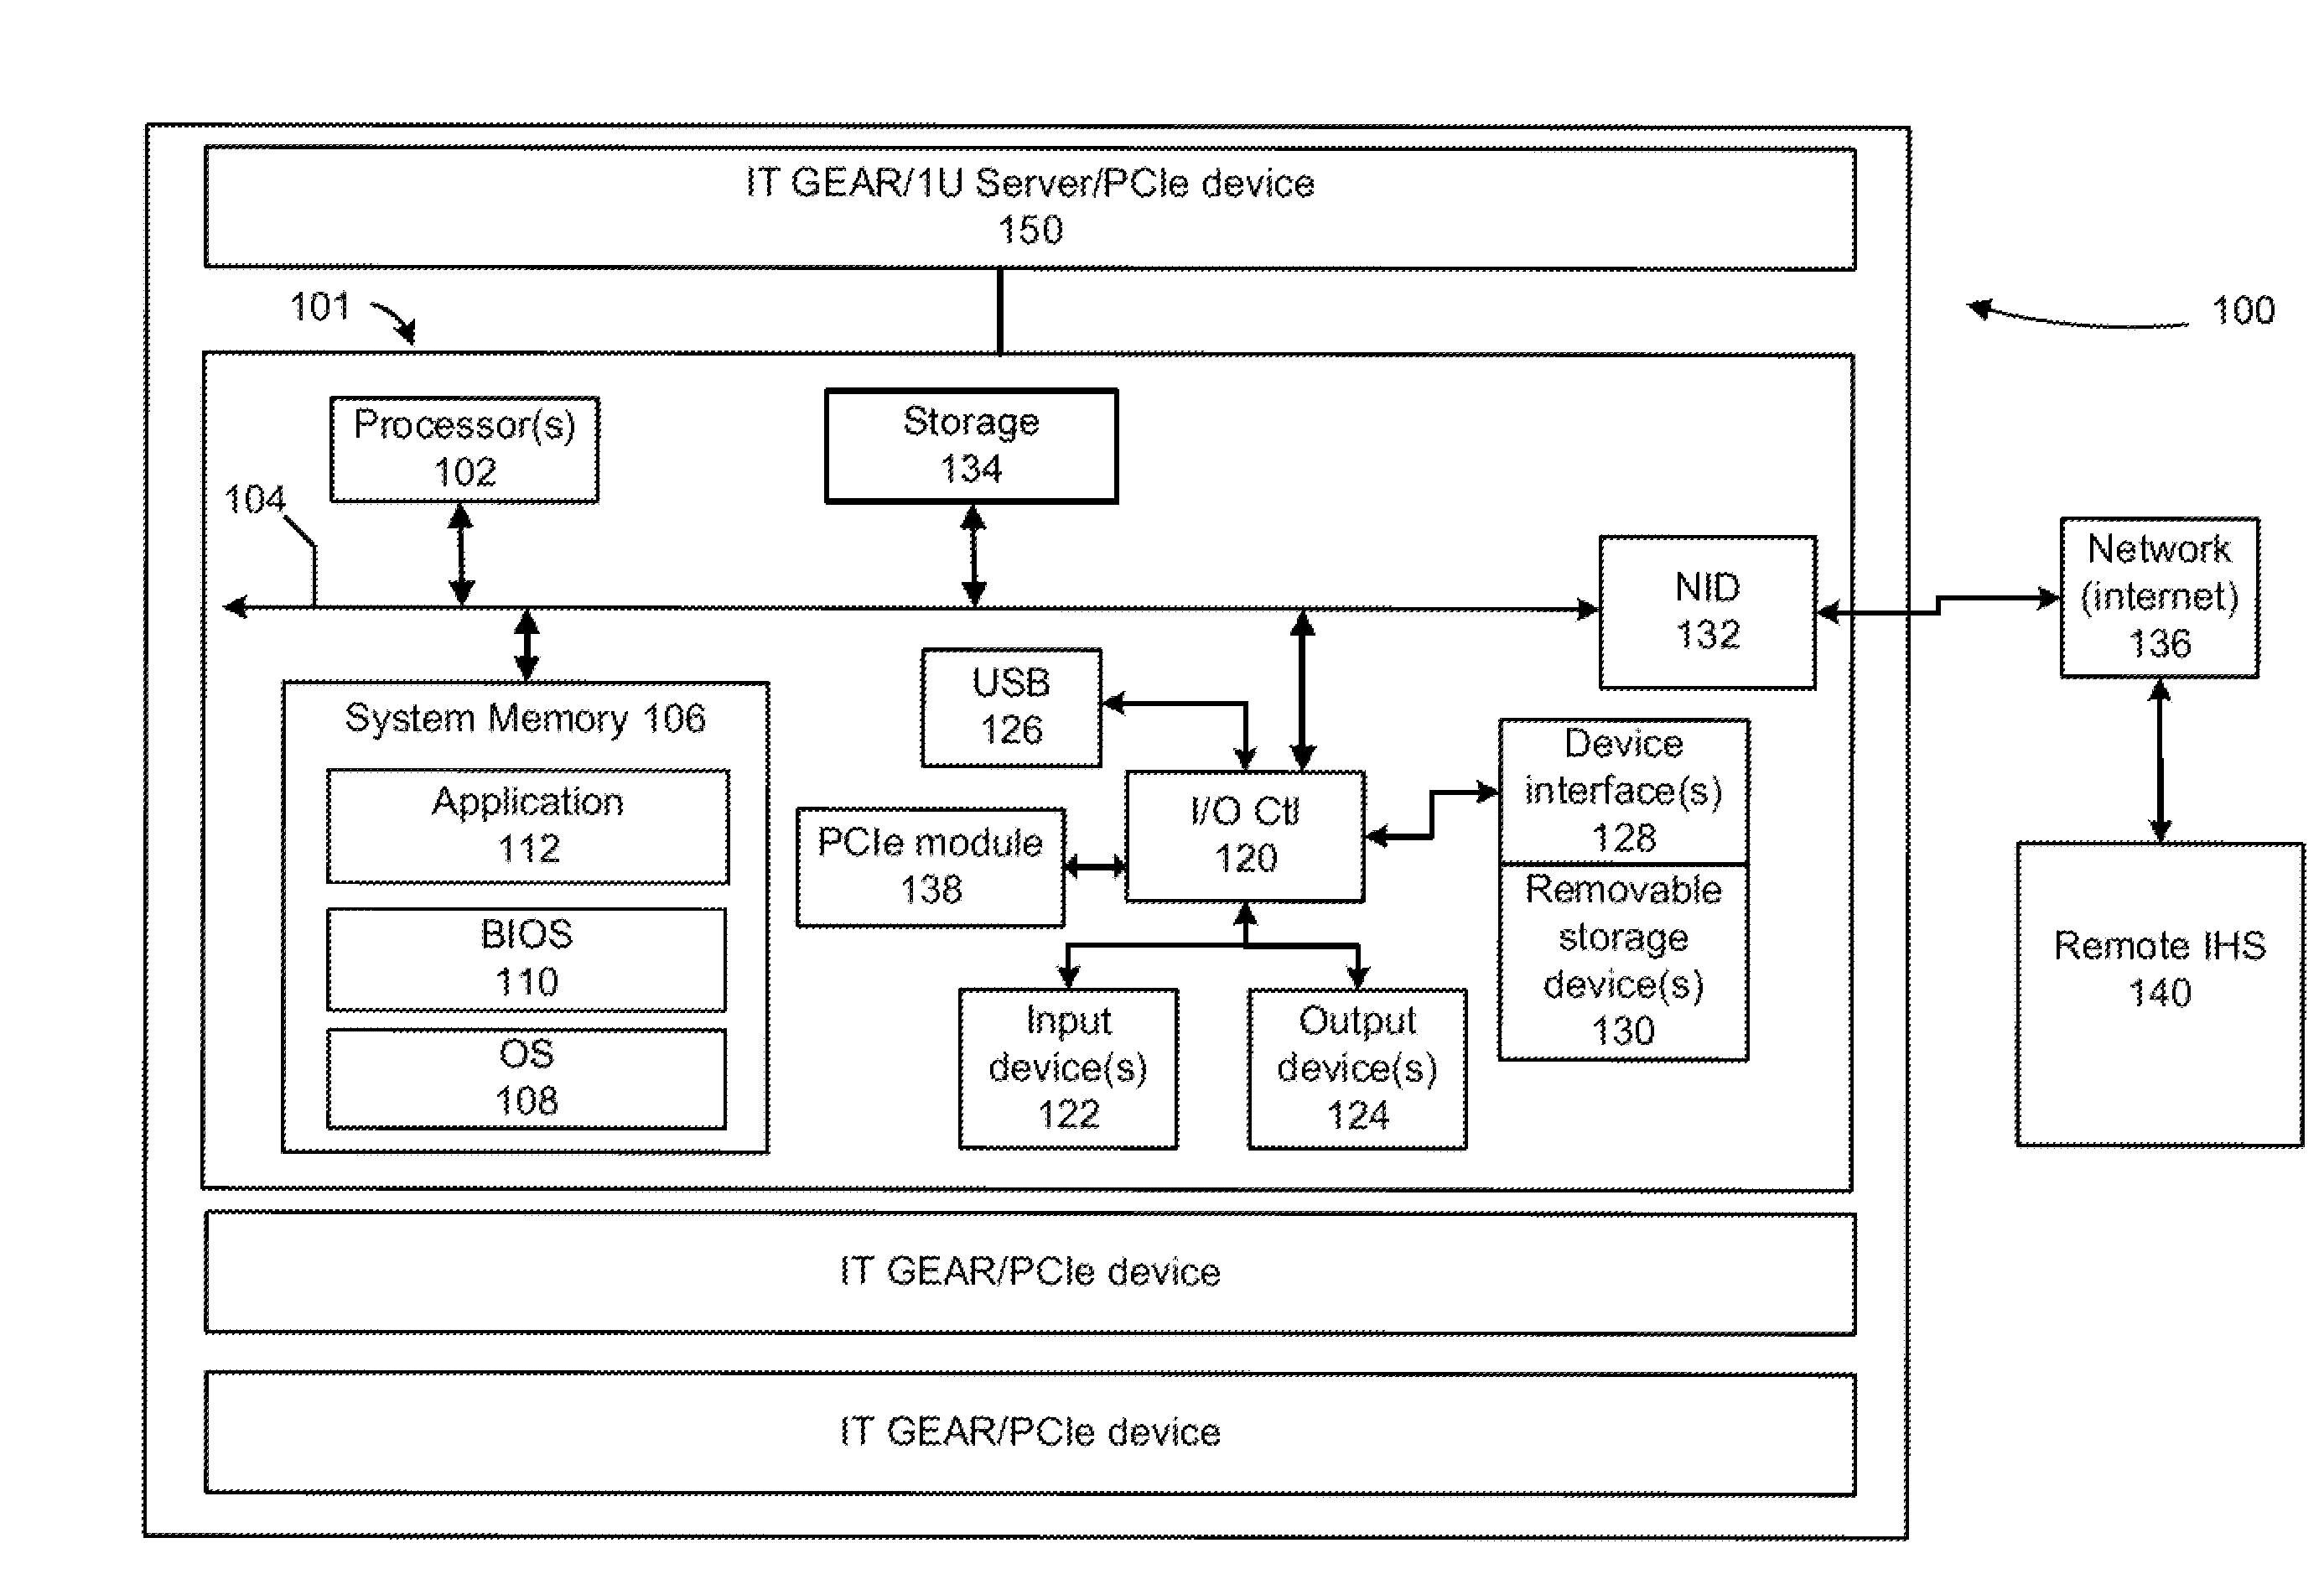 Dense peripheral component interconnect express (PCIE) card mounting and interconnect method